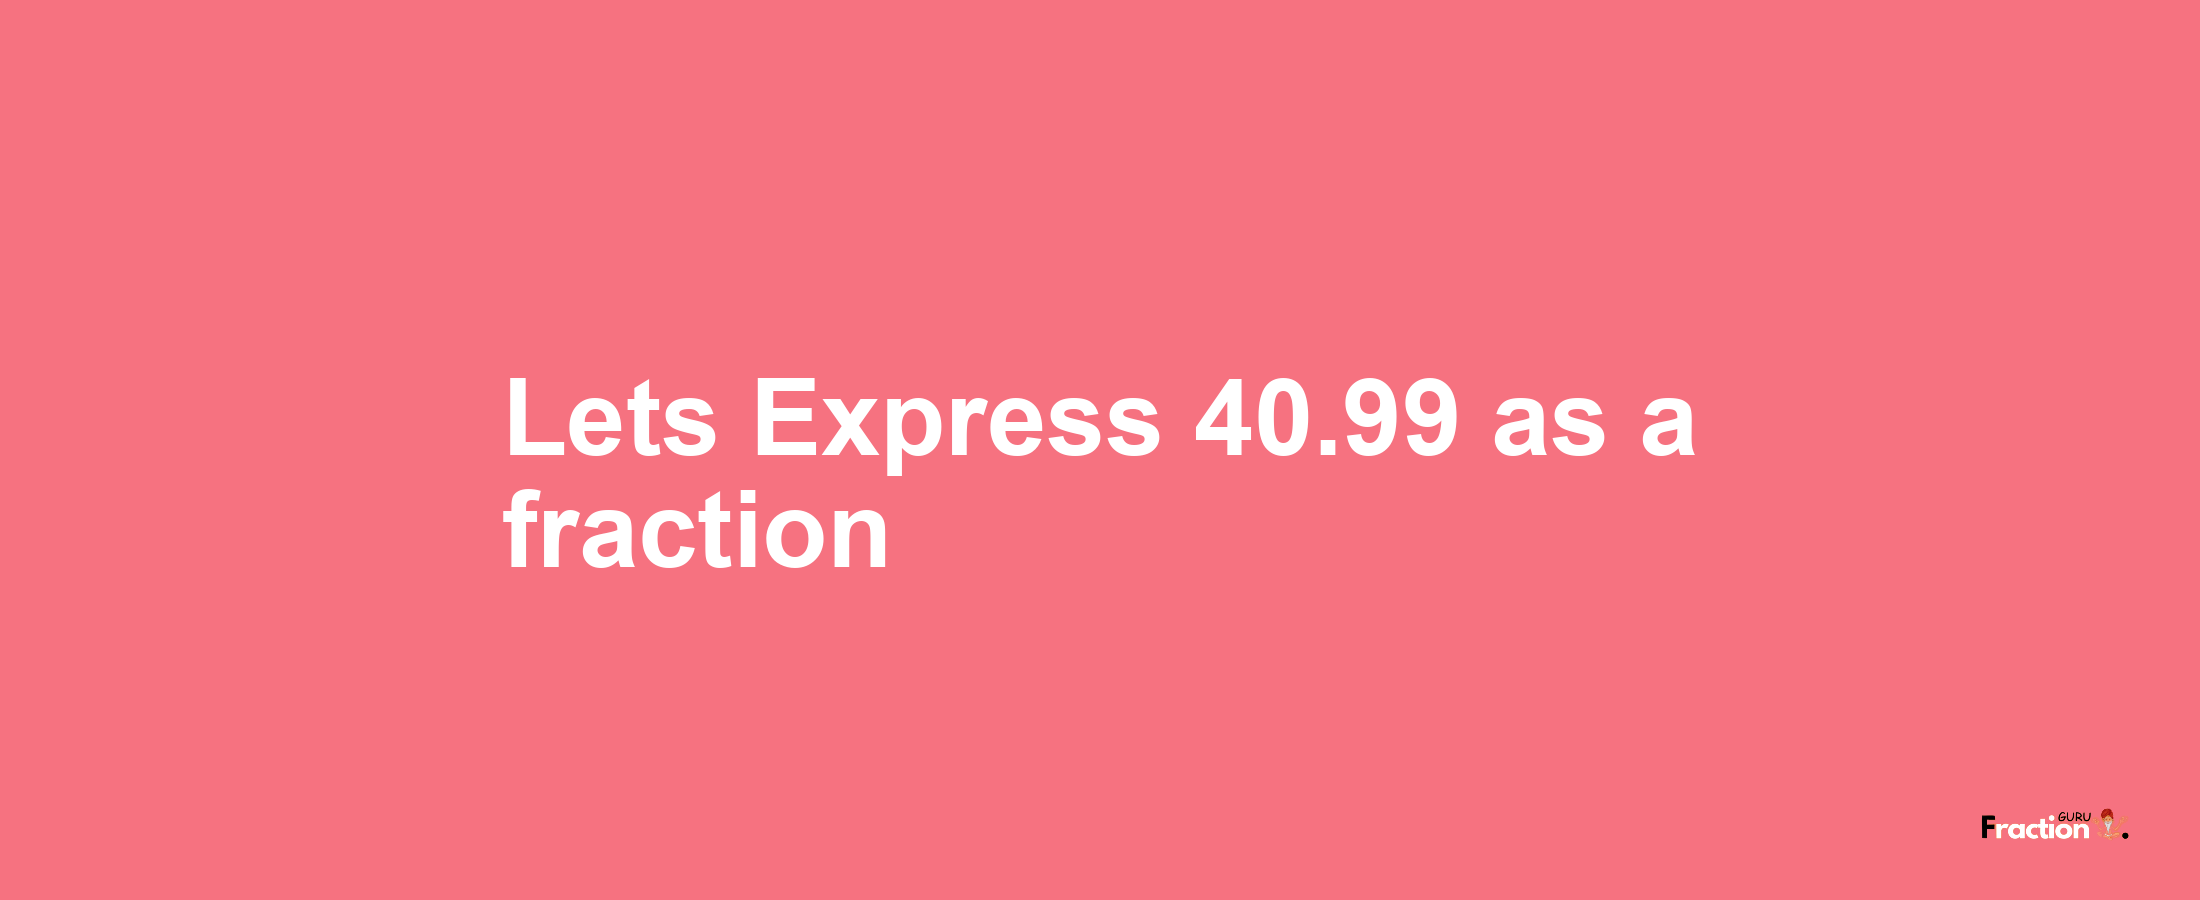 Lets Express 40.99 as afraction